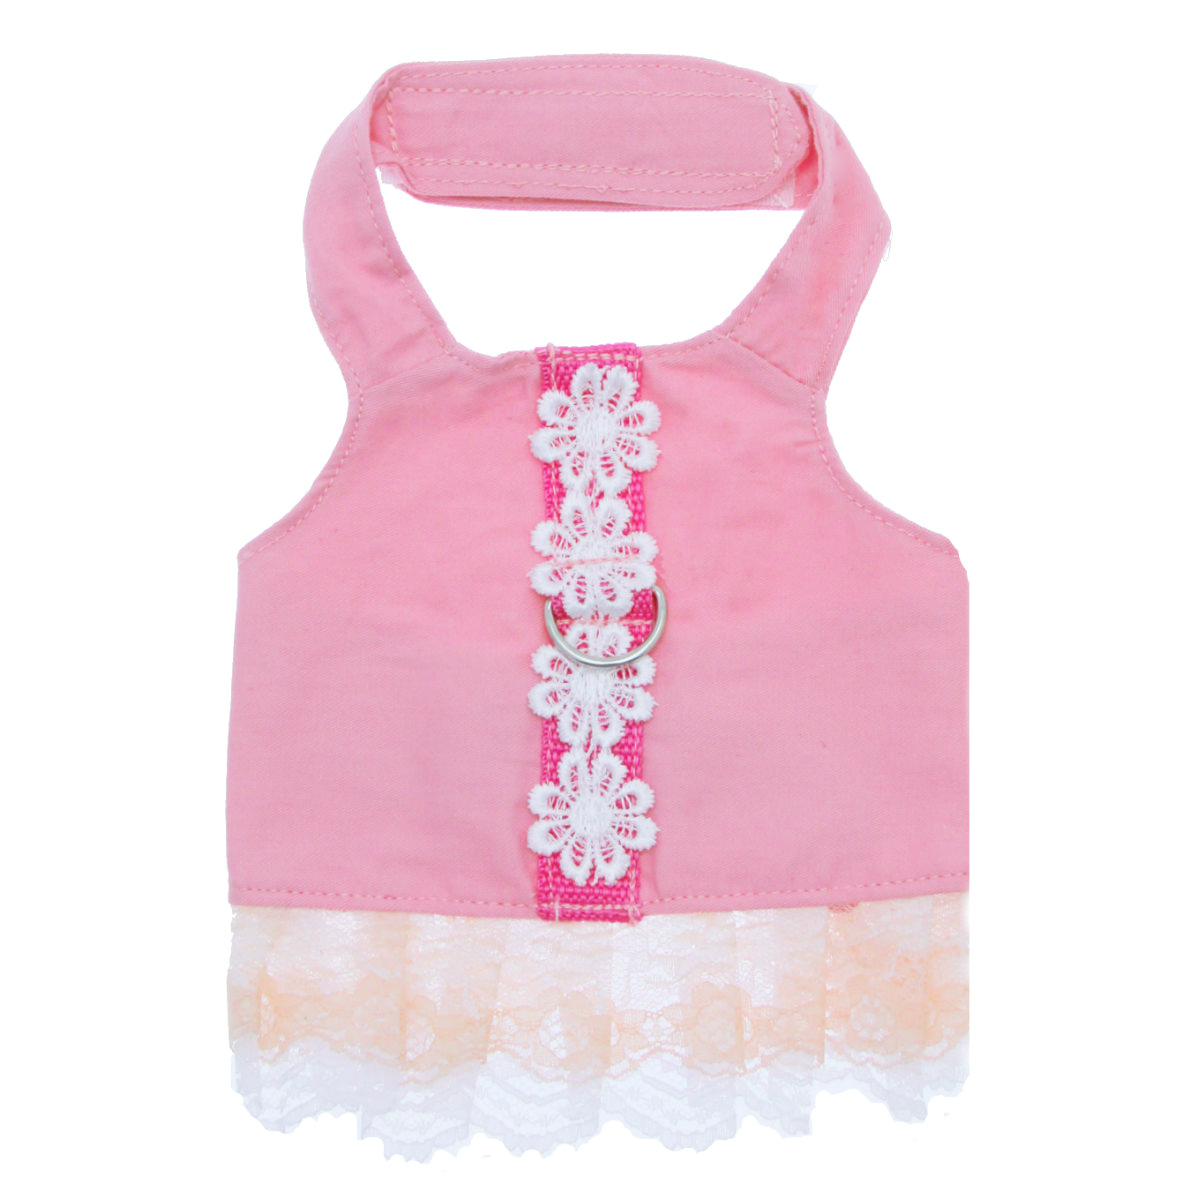 Doggles Flower Dress Harness - Pink